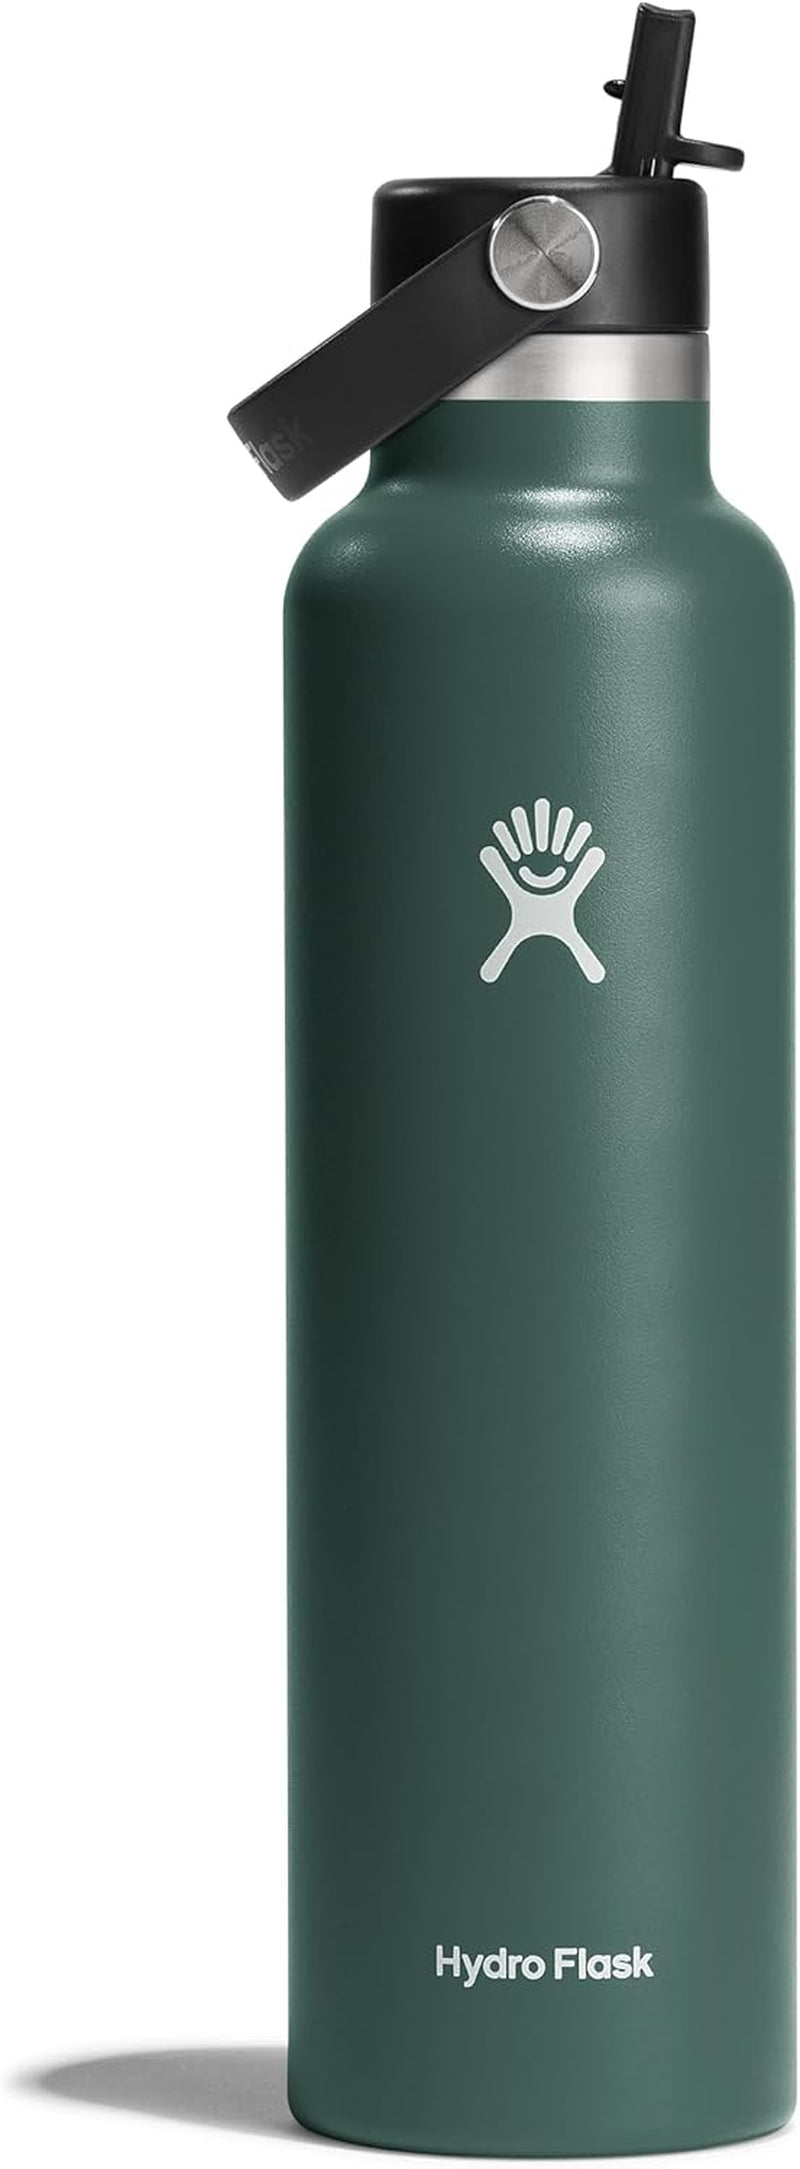 24 Oz Stainless Steel Standard Water Mouth Bottle with Flex Straw Cap and Double-Wall Vacuum Insulation